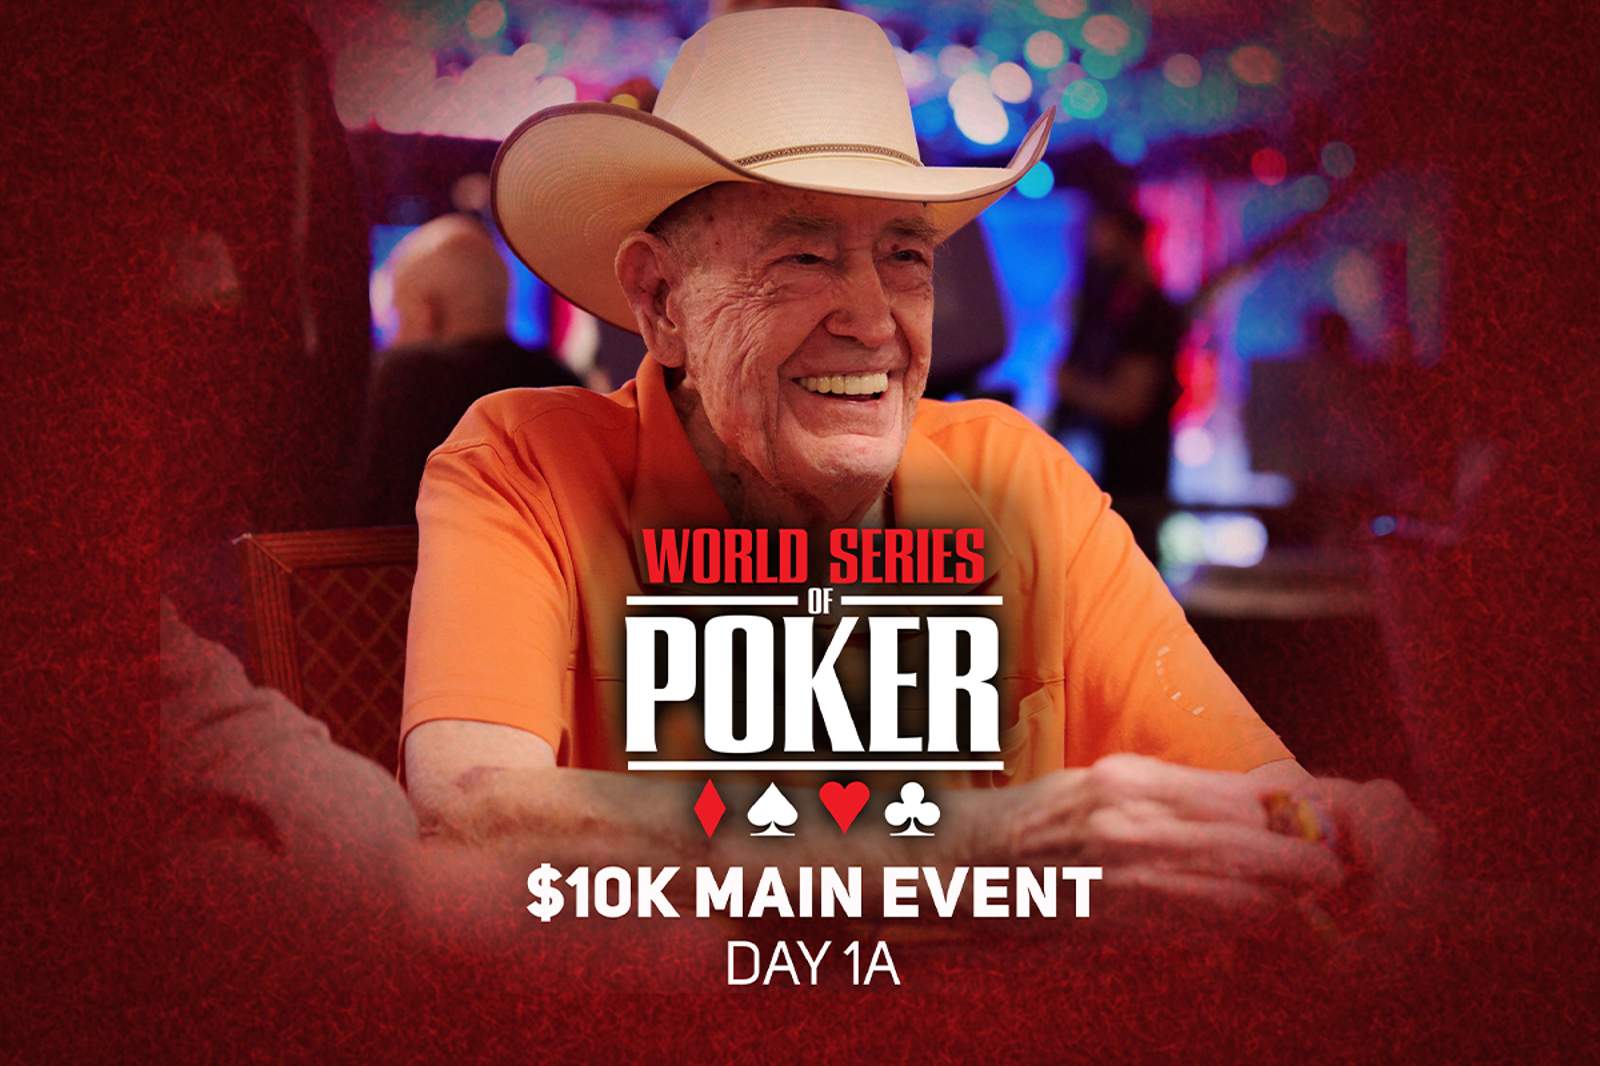 Watch Day 1A of the 2021 WSOP Main Event on PokerGO.com at 7:30 p.m. ET